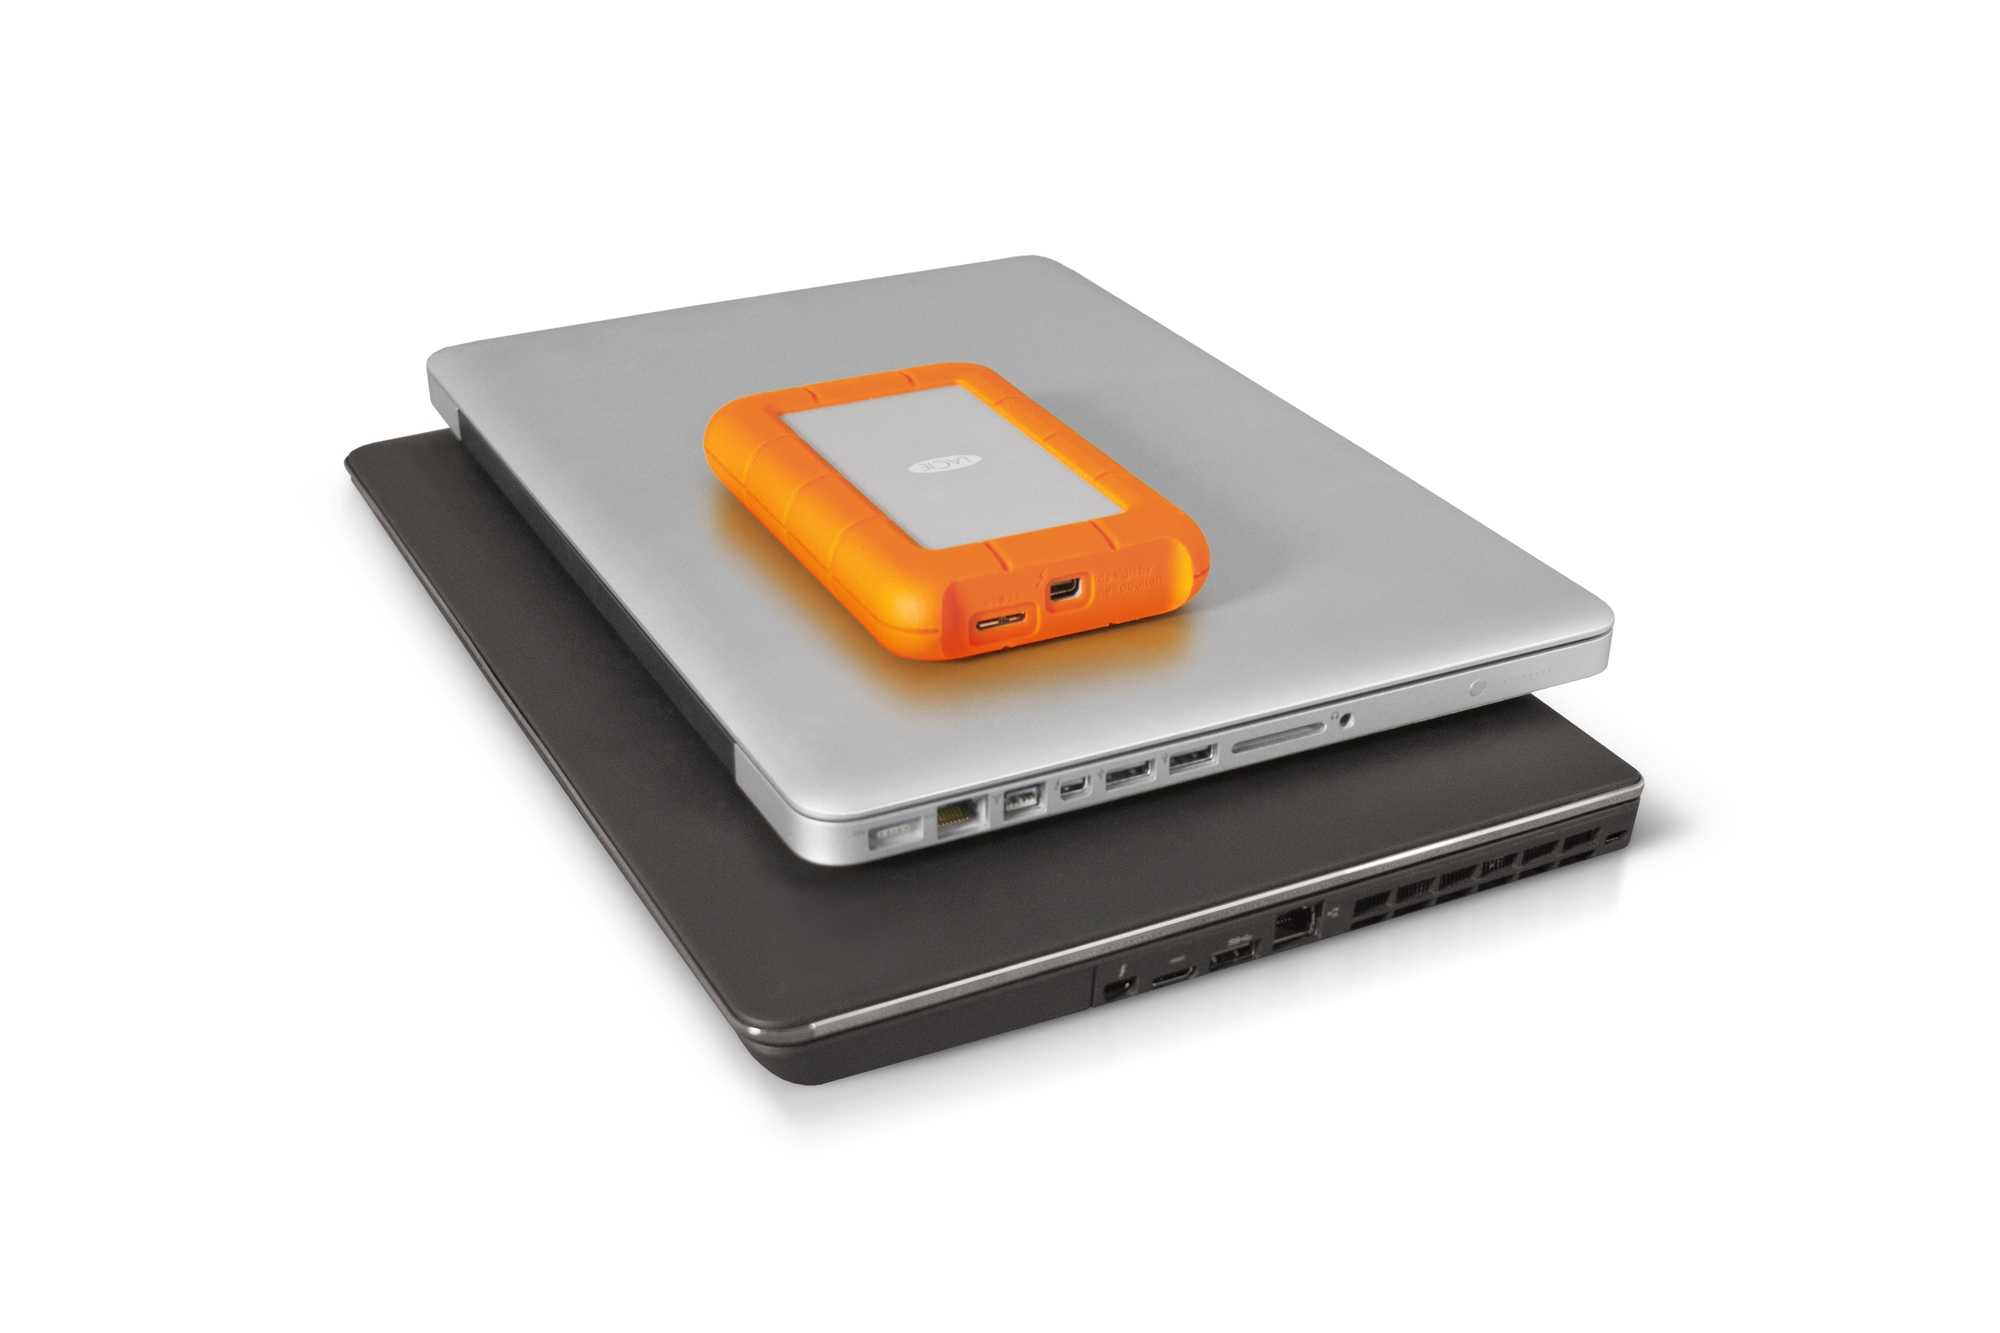 Media asset in full size related to 3dfxzone.it news item entitled as follows: USB 3.0 e Thunderbolt insieme nel nuovo drive Rugged di LaCie | Image Name: news18122_Lacie-Rugged-USB-3.0-Thunderbolt_3.jpg